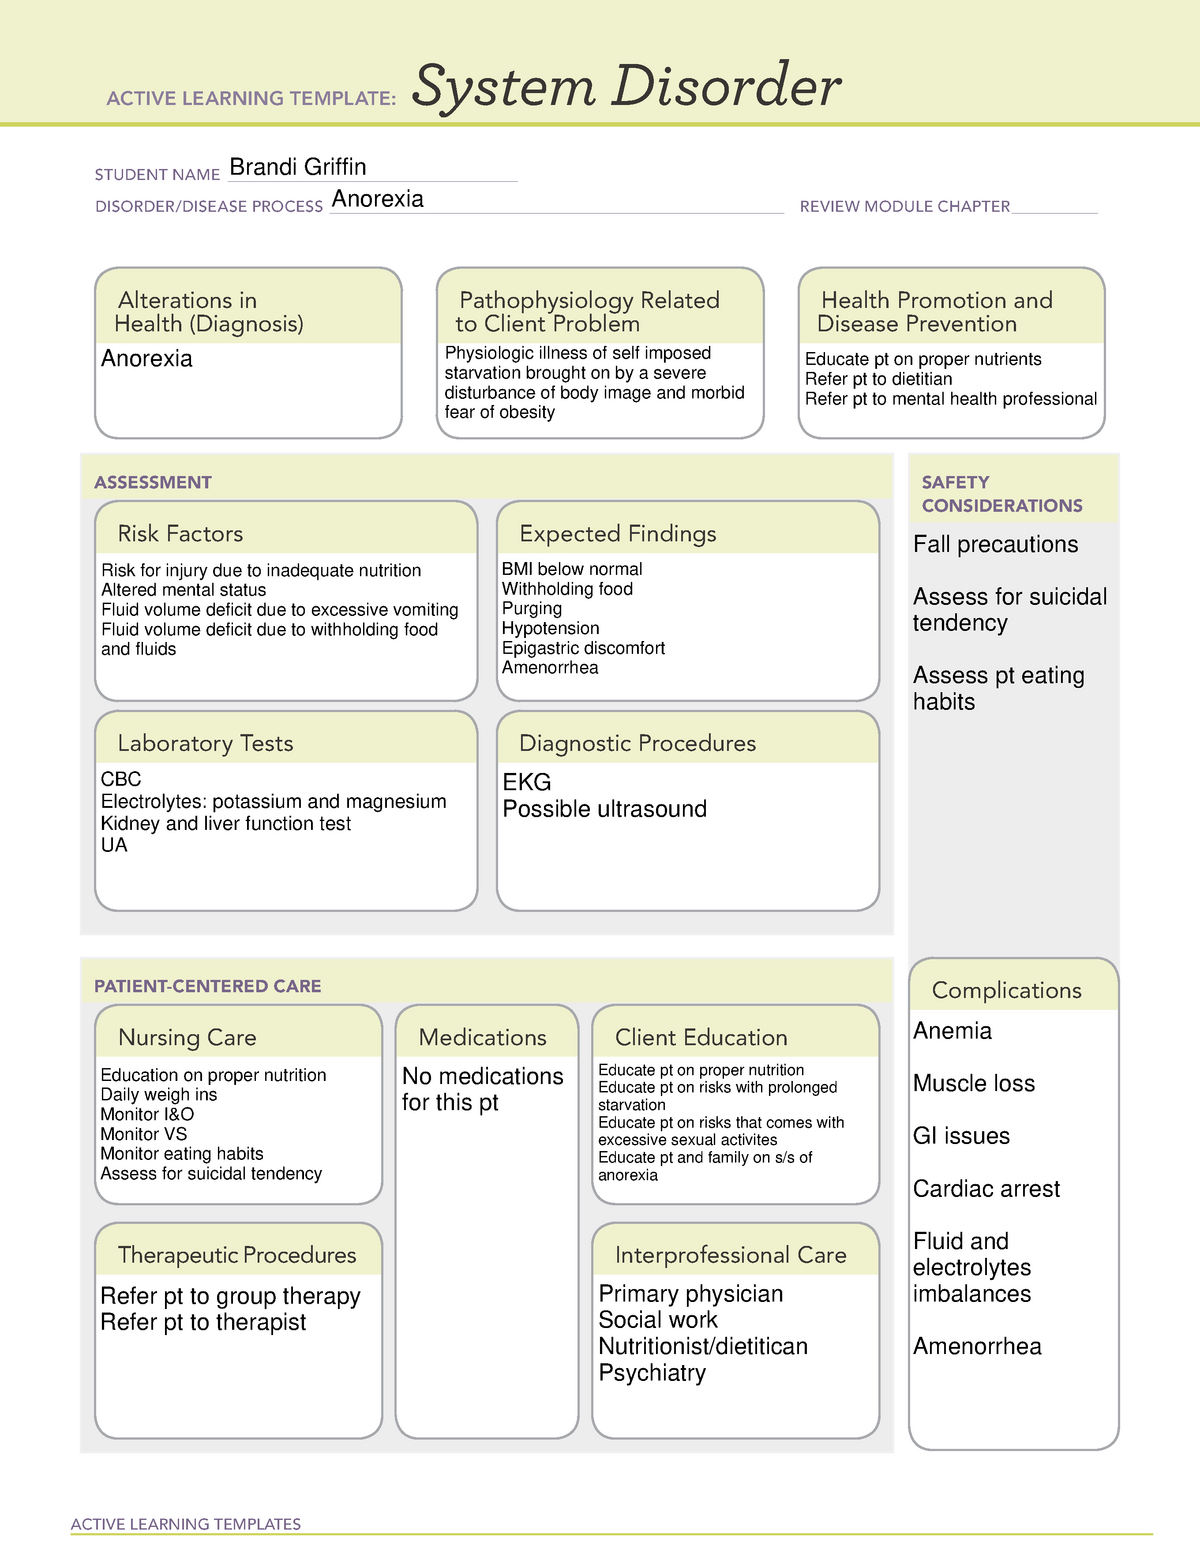 Anorexia SD - System disorder - ACTIVE LEARNING TEMPLATES System ...